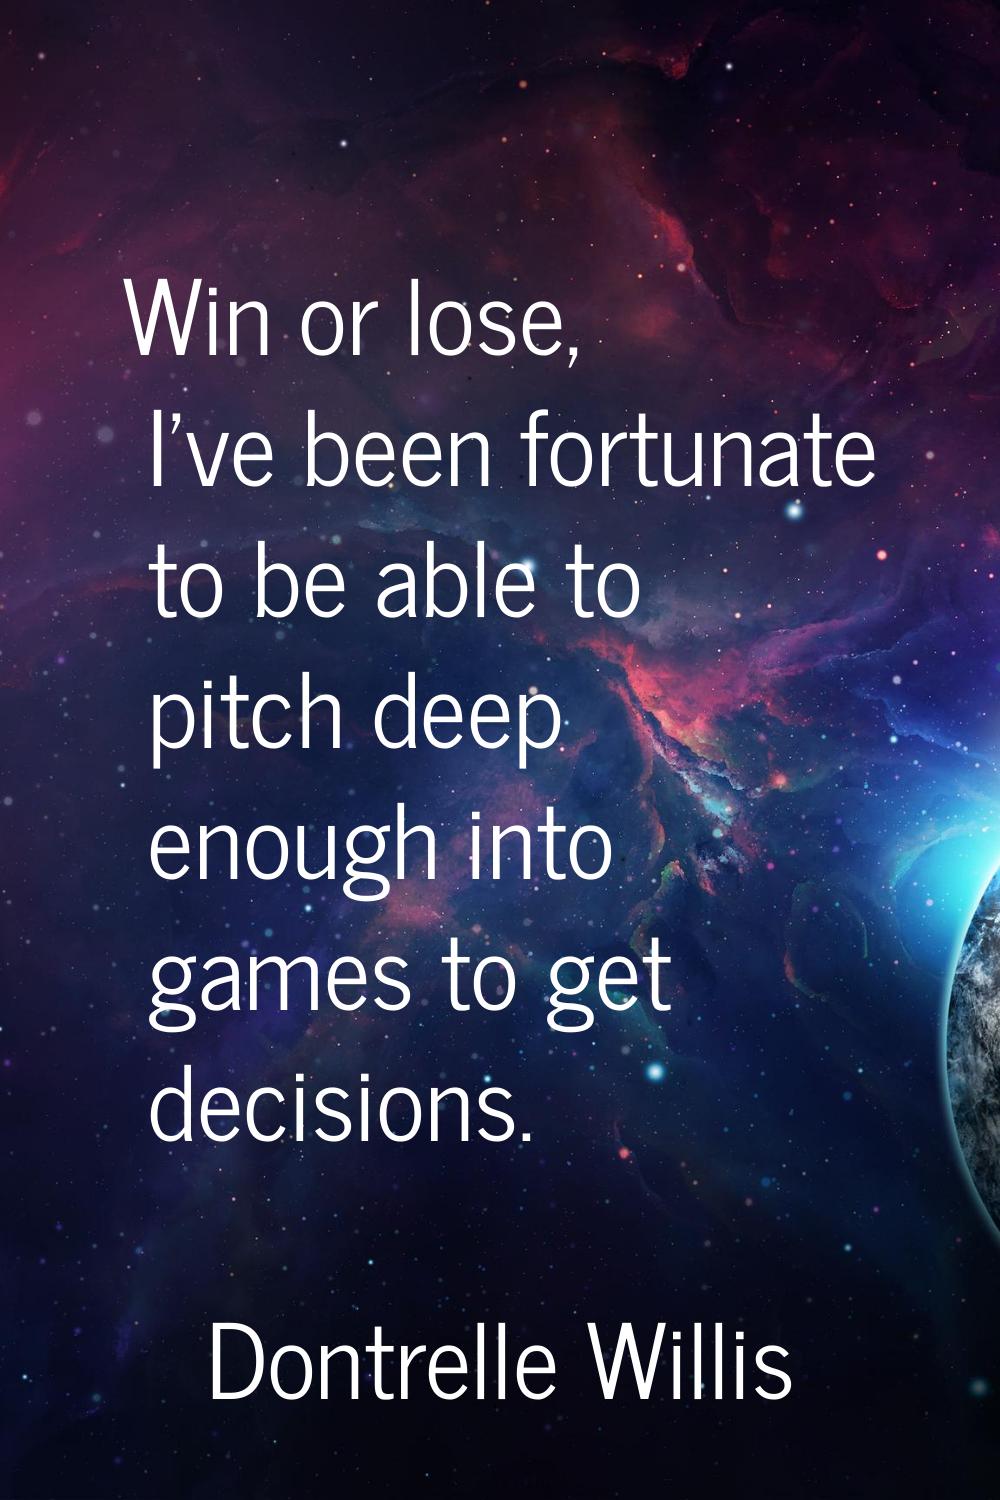 Win or lose, I've been fortunate to be able to pitch deep enough into games to get decisions.